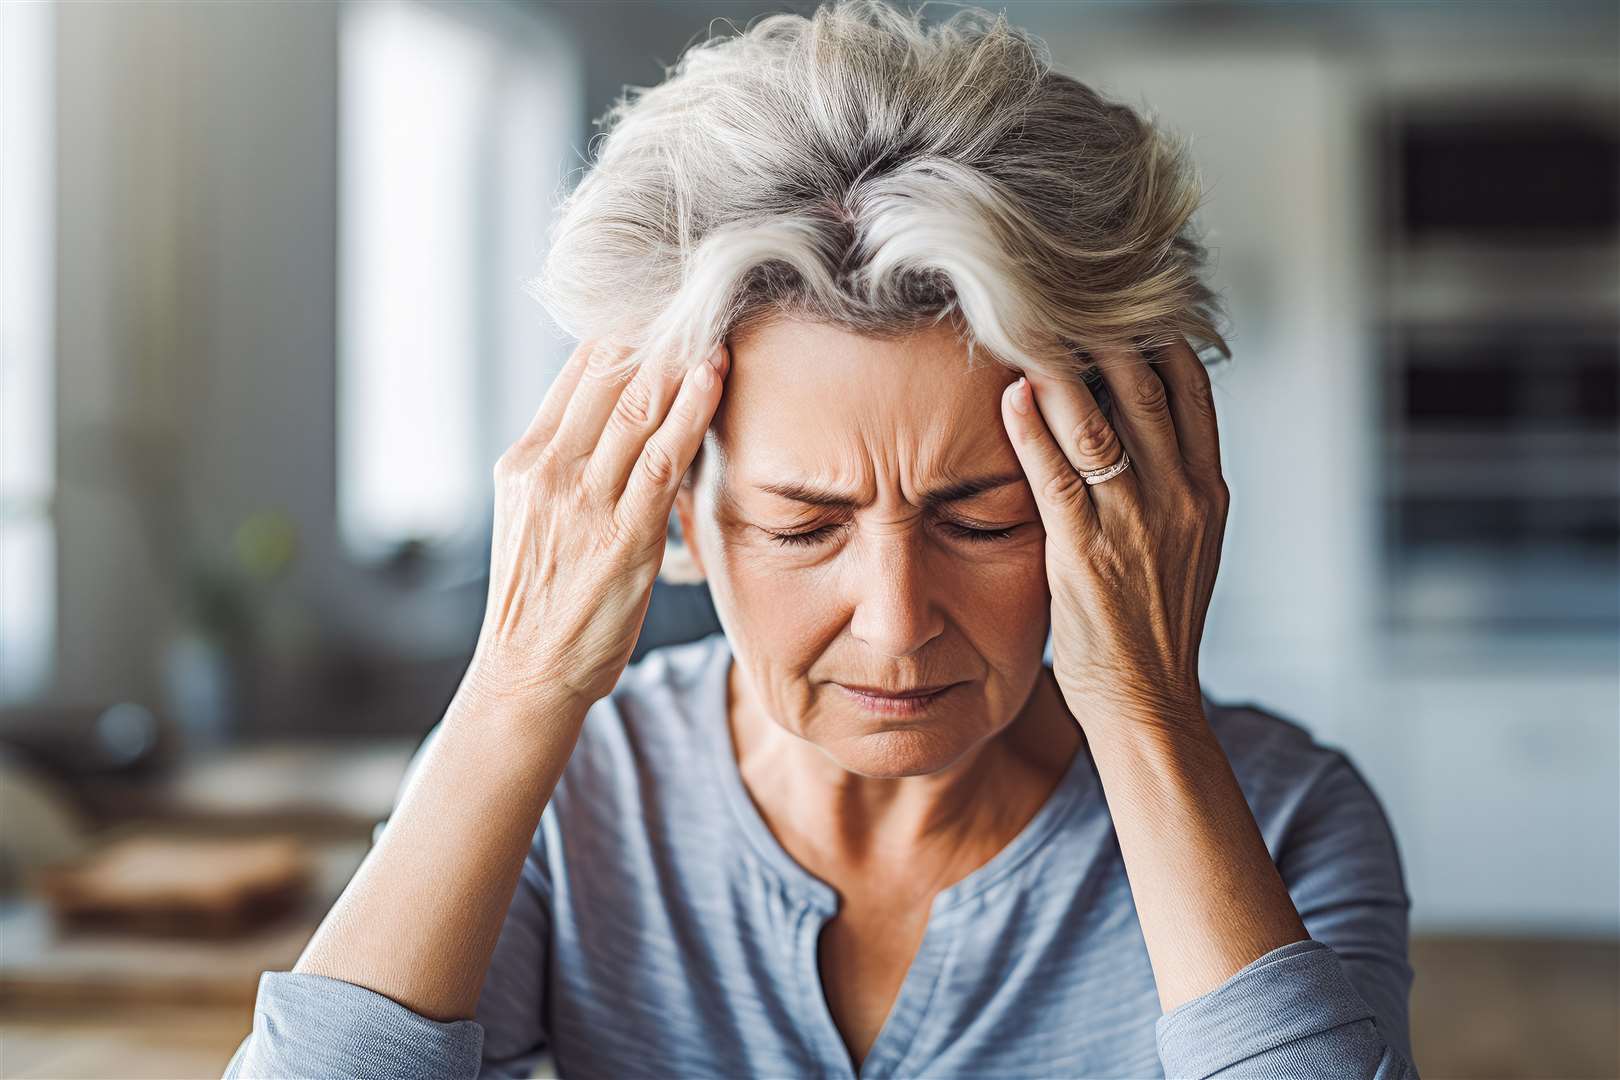 Migraine pain can be extremely debilitating.